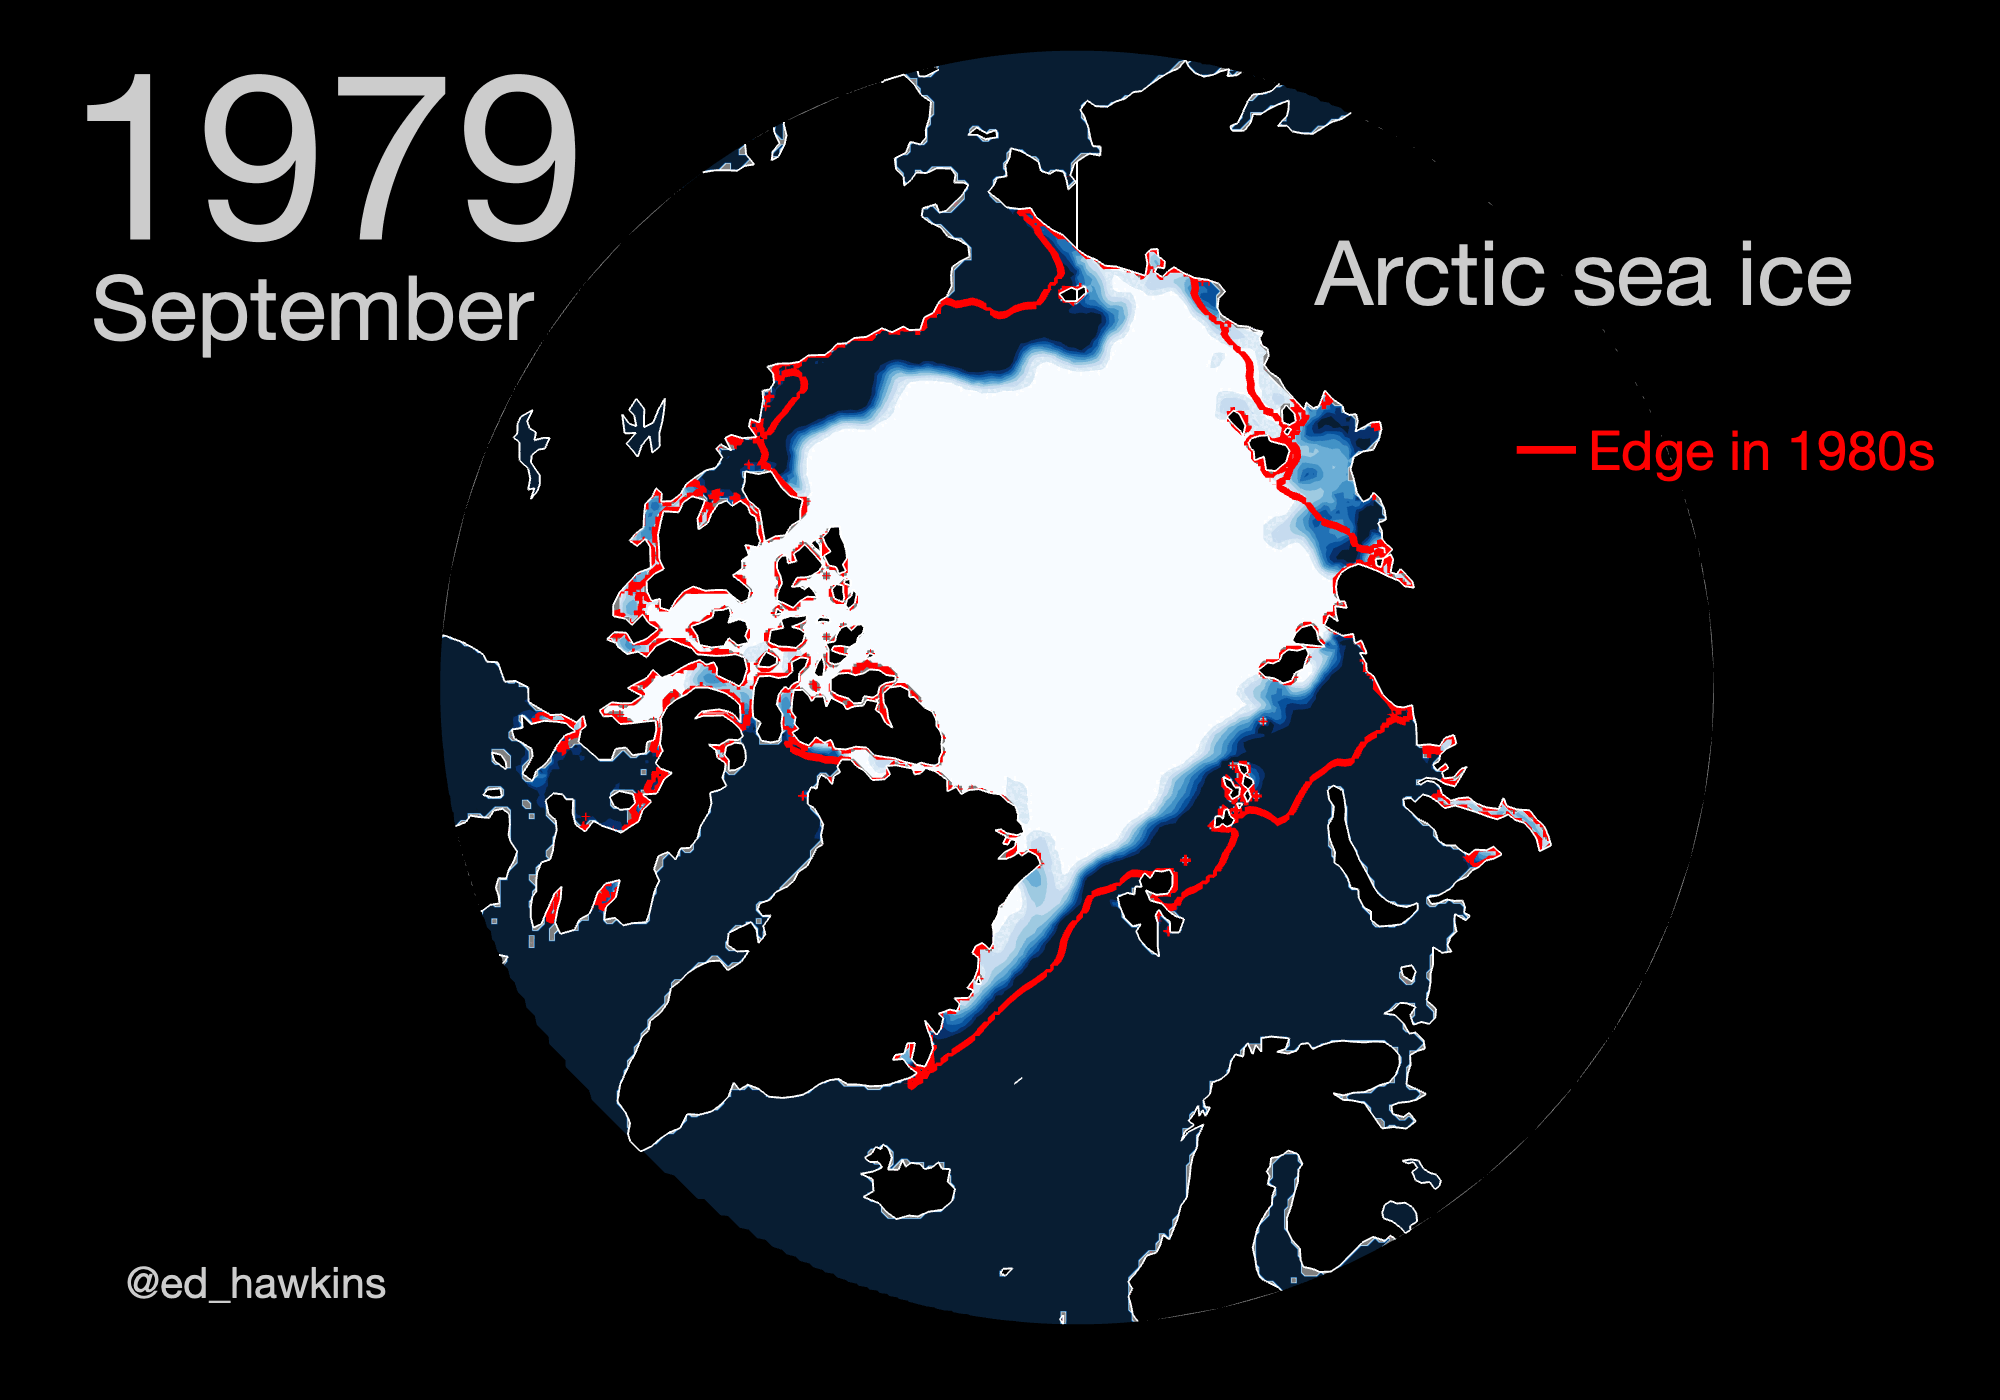 An animation of how summer Arctic sea ice extent has varied from 1979 to 2022, with a dated map of the Arctic, a red line showing the sea ice edge in the 1980s, and a changing white shape depicting the sea ice coverage.